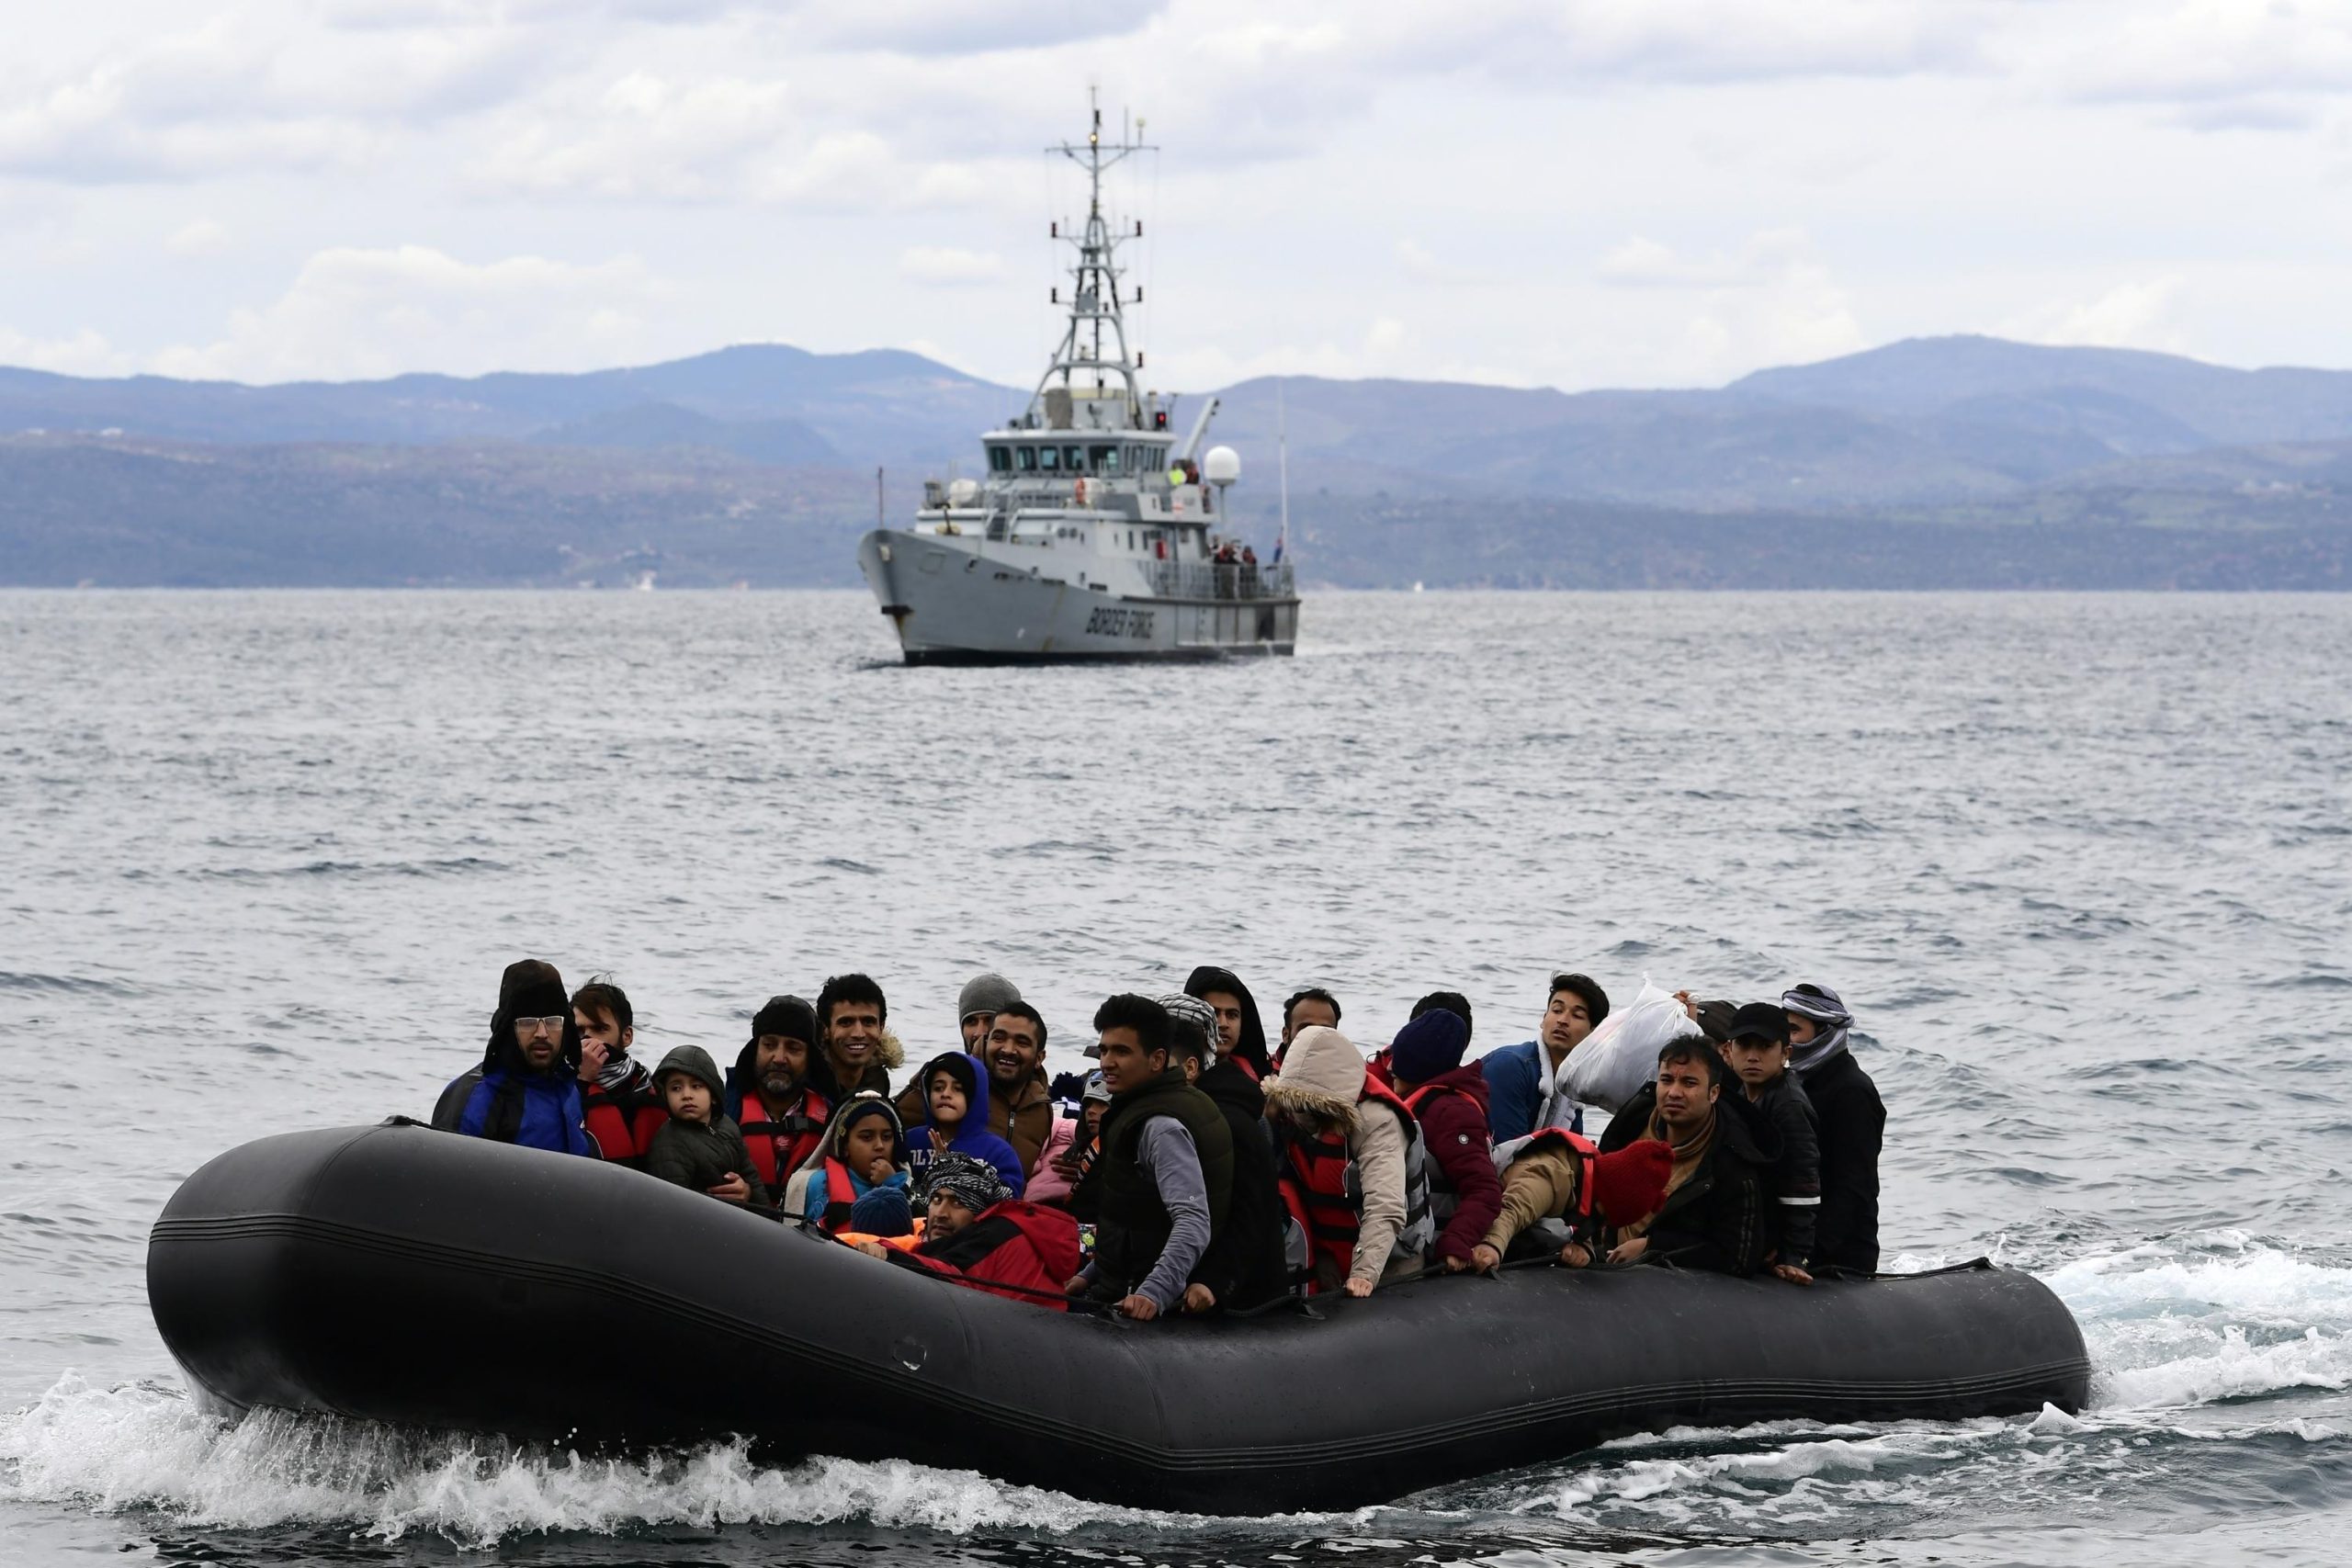 EU report: Frontex covered up migrant pushbacks from Greece 2